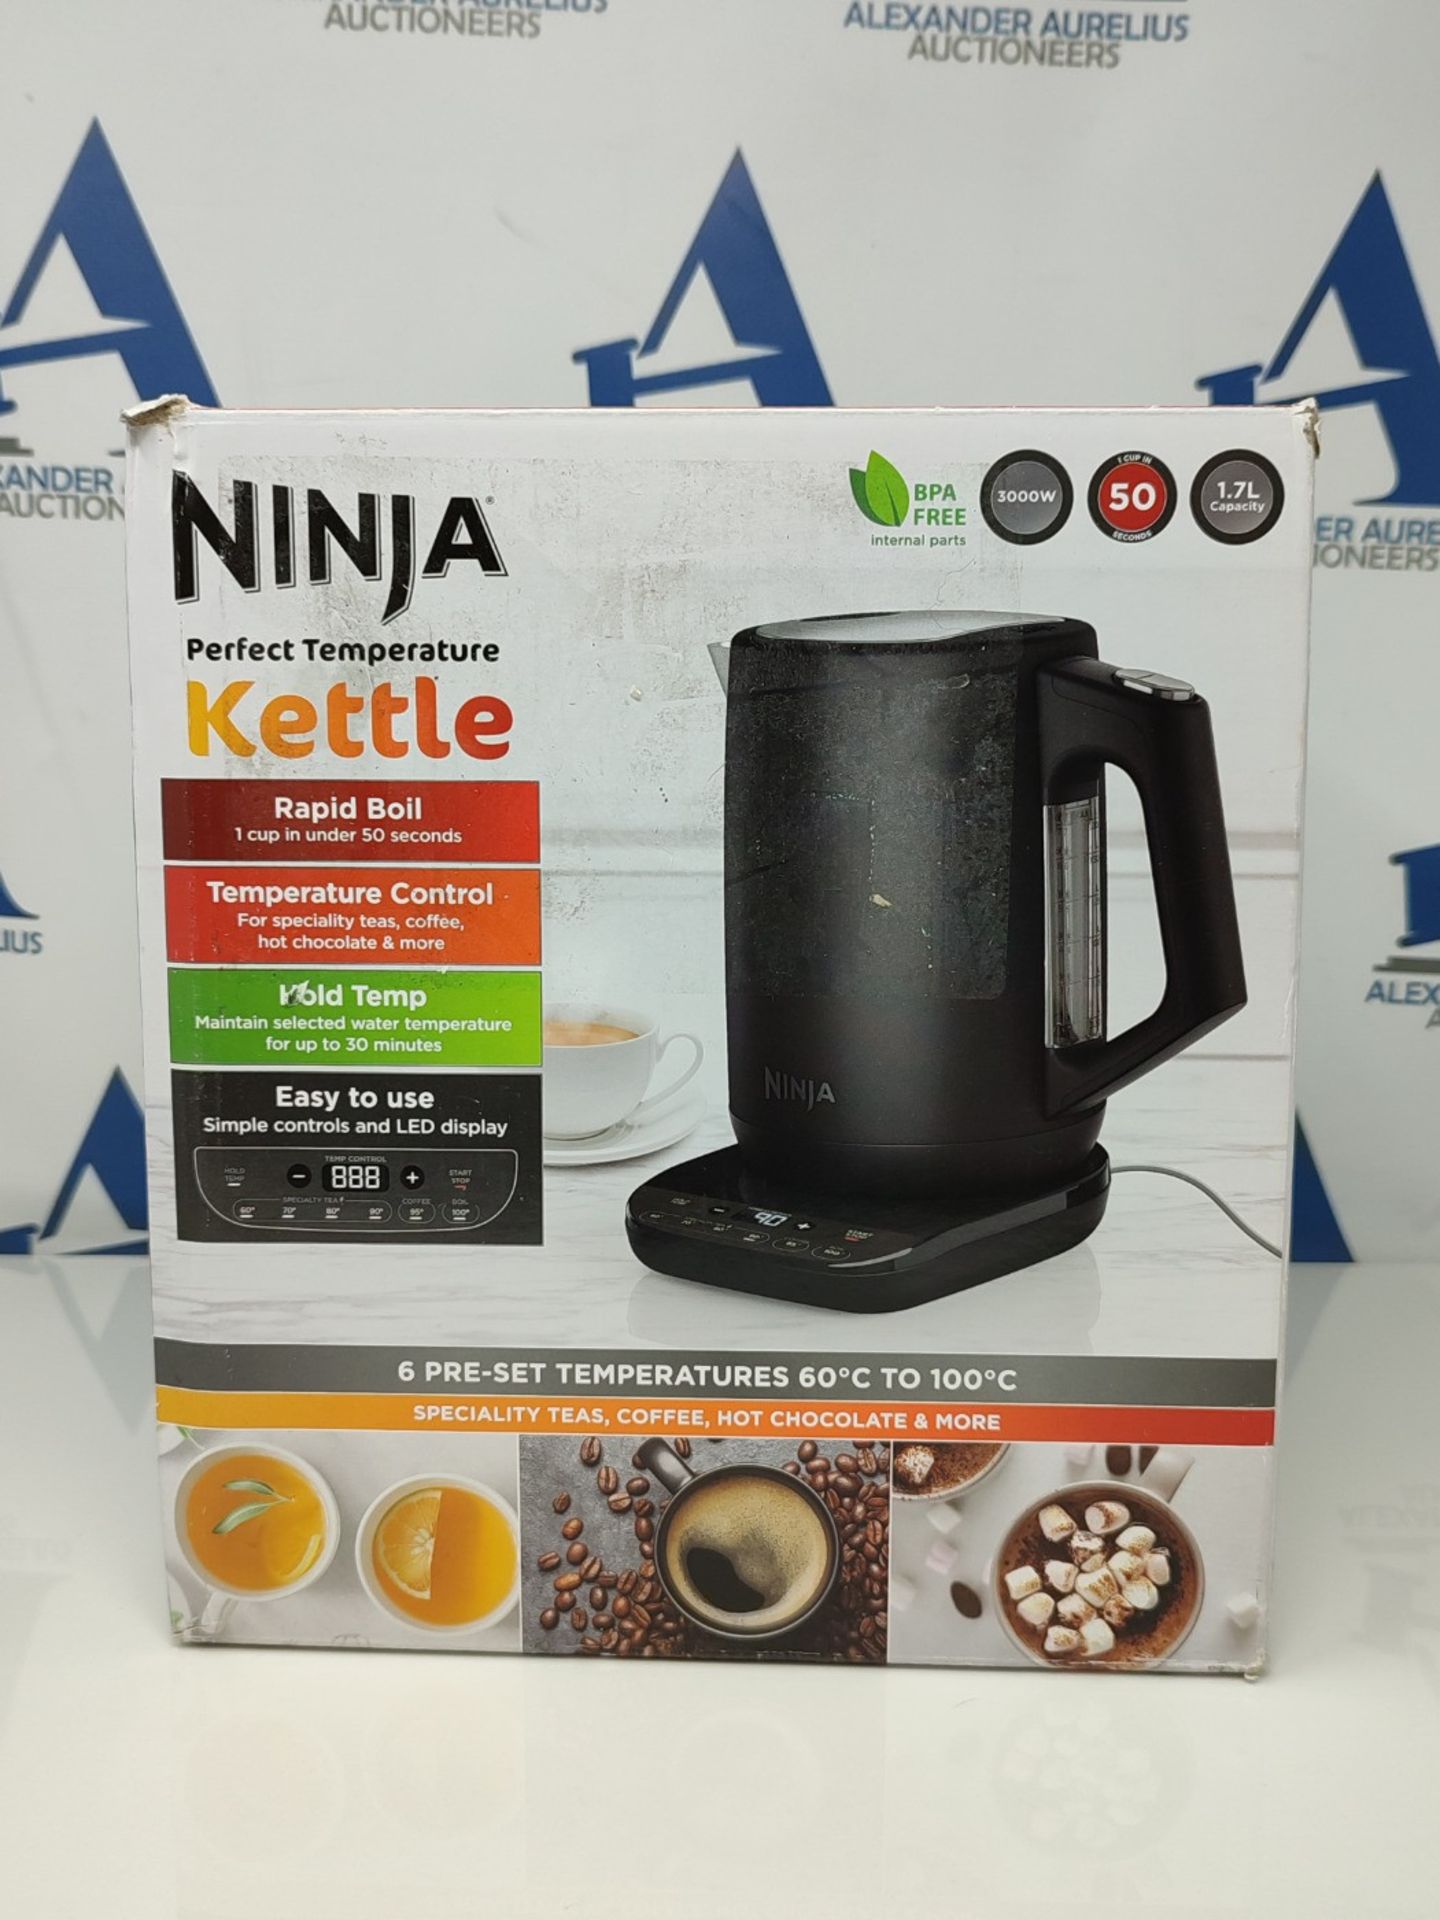 RRP £79.00 Ninja Perfect Temperature Kettle, 1.7L, with Temperature Control, LED Display, Easy to - Bild 2 aus 3